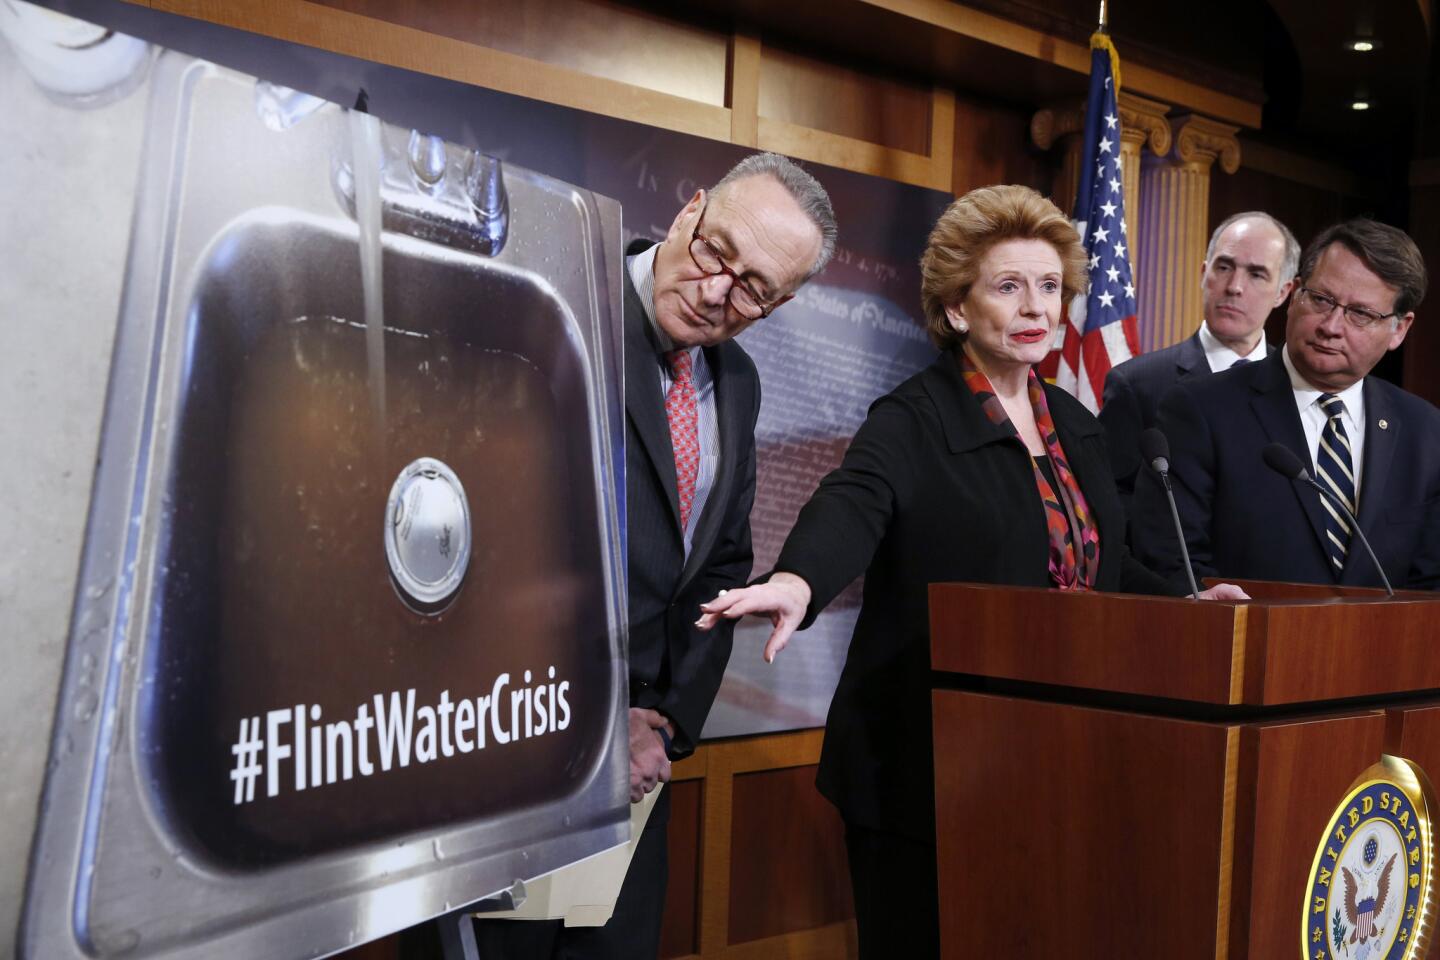 U.S. Sen. Debbie Stabenow, D-Mich., second from left, accompanied by Sen. Charles Schumer, D-N.Y., from left, Sen. Bob Casey, D-Pa., and Sen. Gary Peters, D-Mich., discusses proposed legislation to help Flint, Mich., with its water crisis during a news conference Jan. 28, 2016, in Washington.